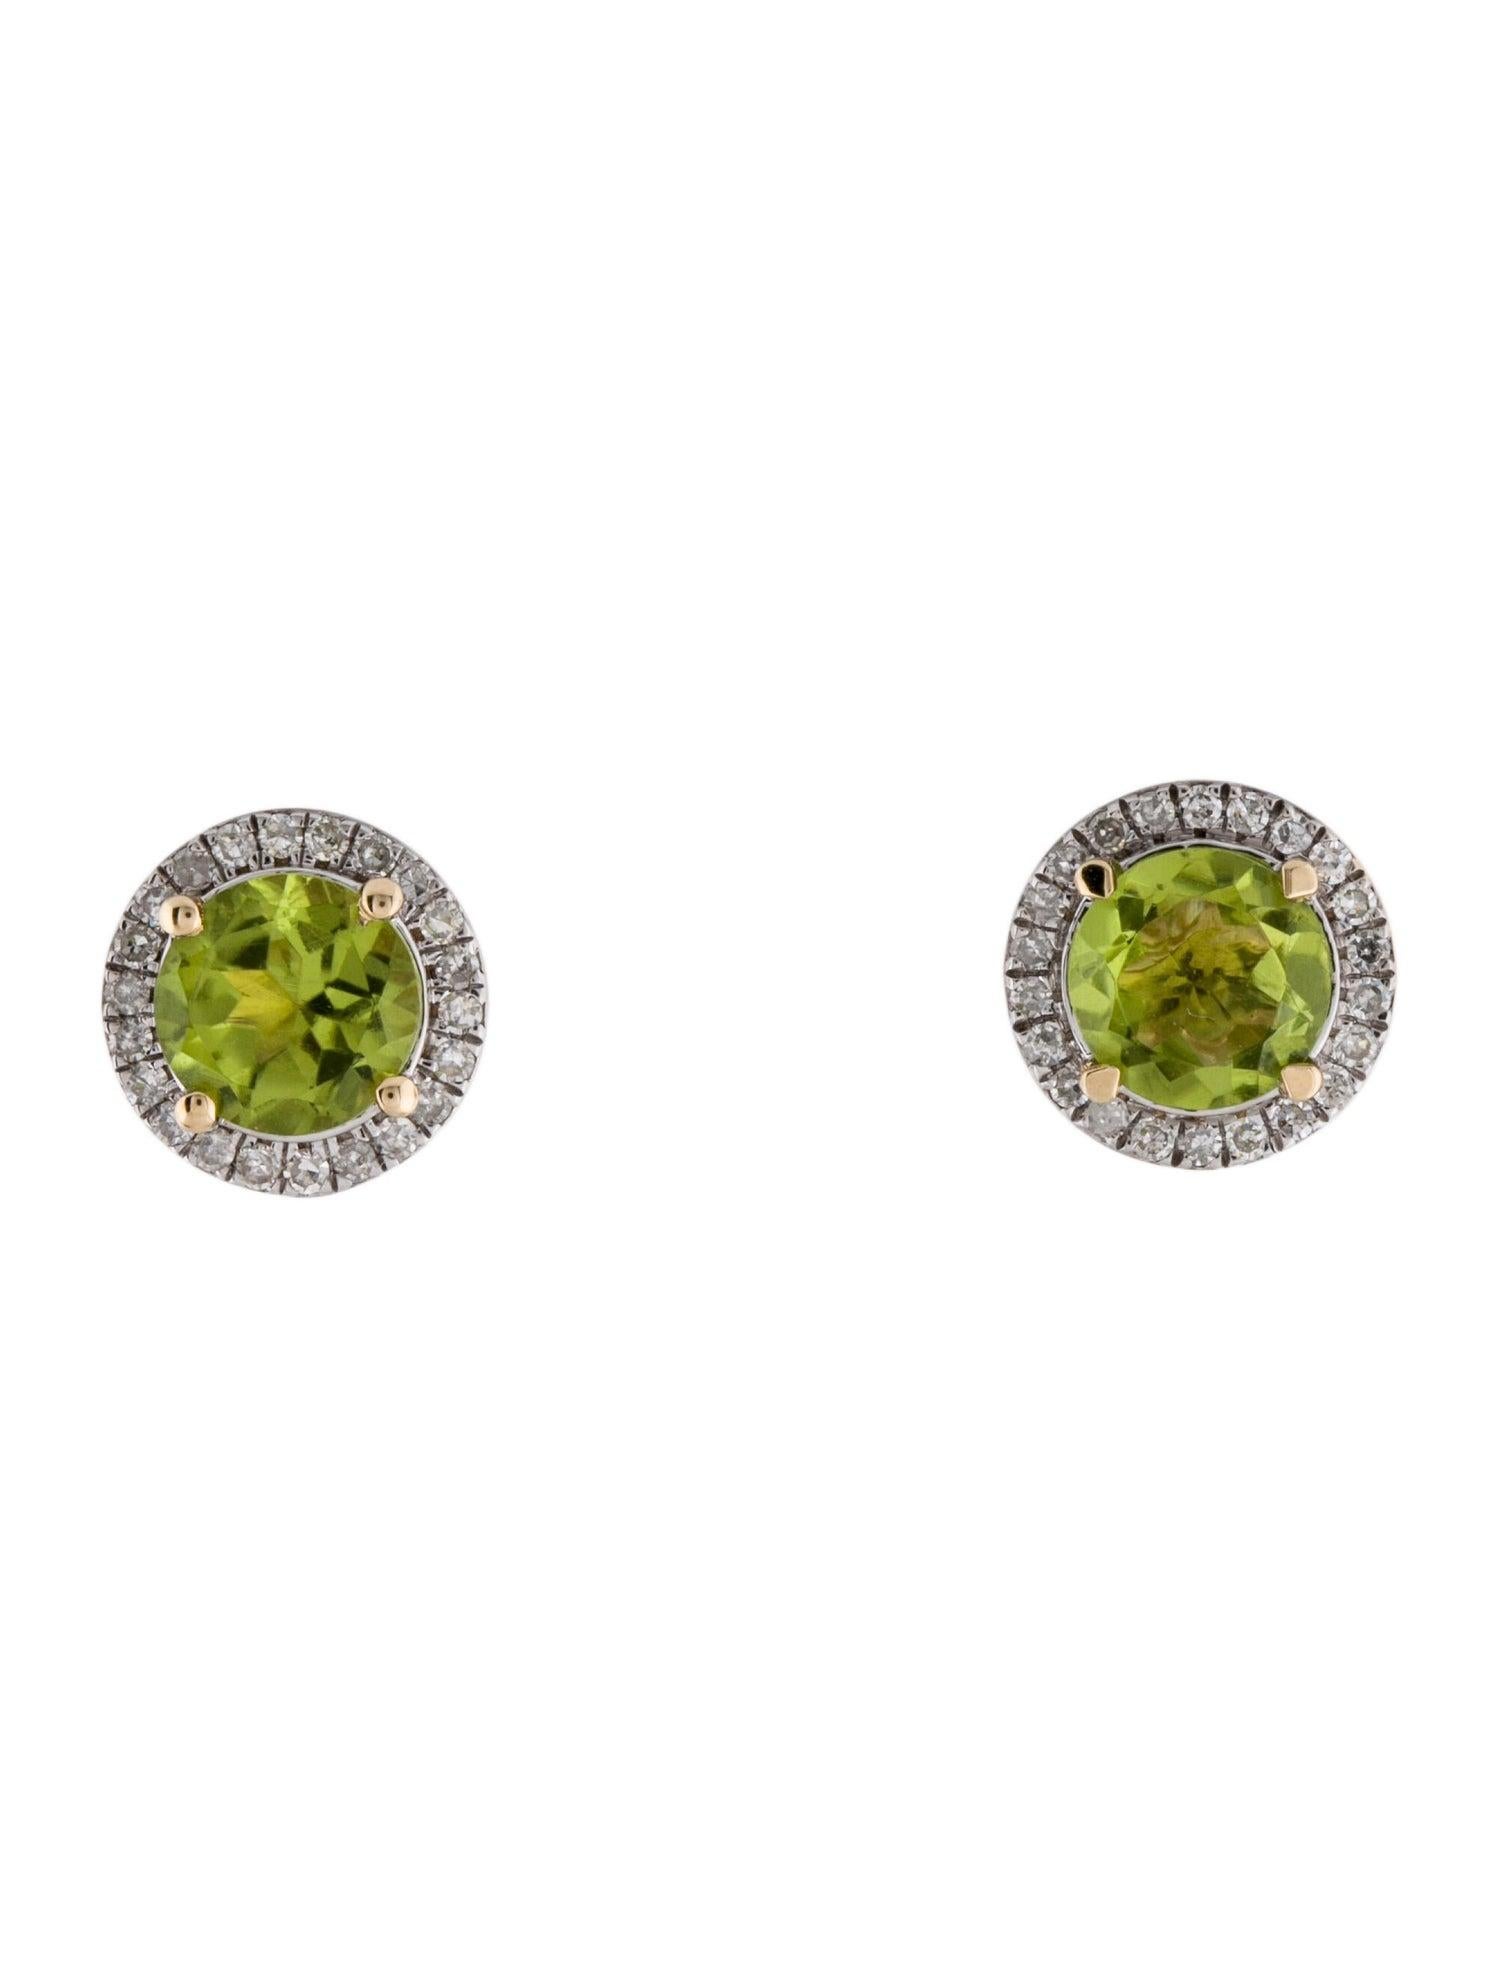 Elevate your style with the exquisite Harmony in Green Peridot and Diamond Earrings from Jeweltique. Crafted with precision and passion, these earrings are a testament to our brand's dedication to quality and nature-inspired elegance.

The soothing